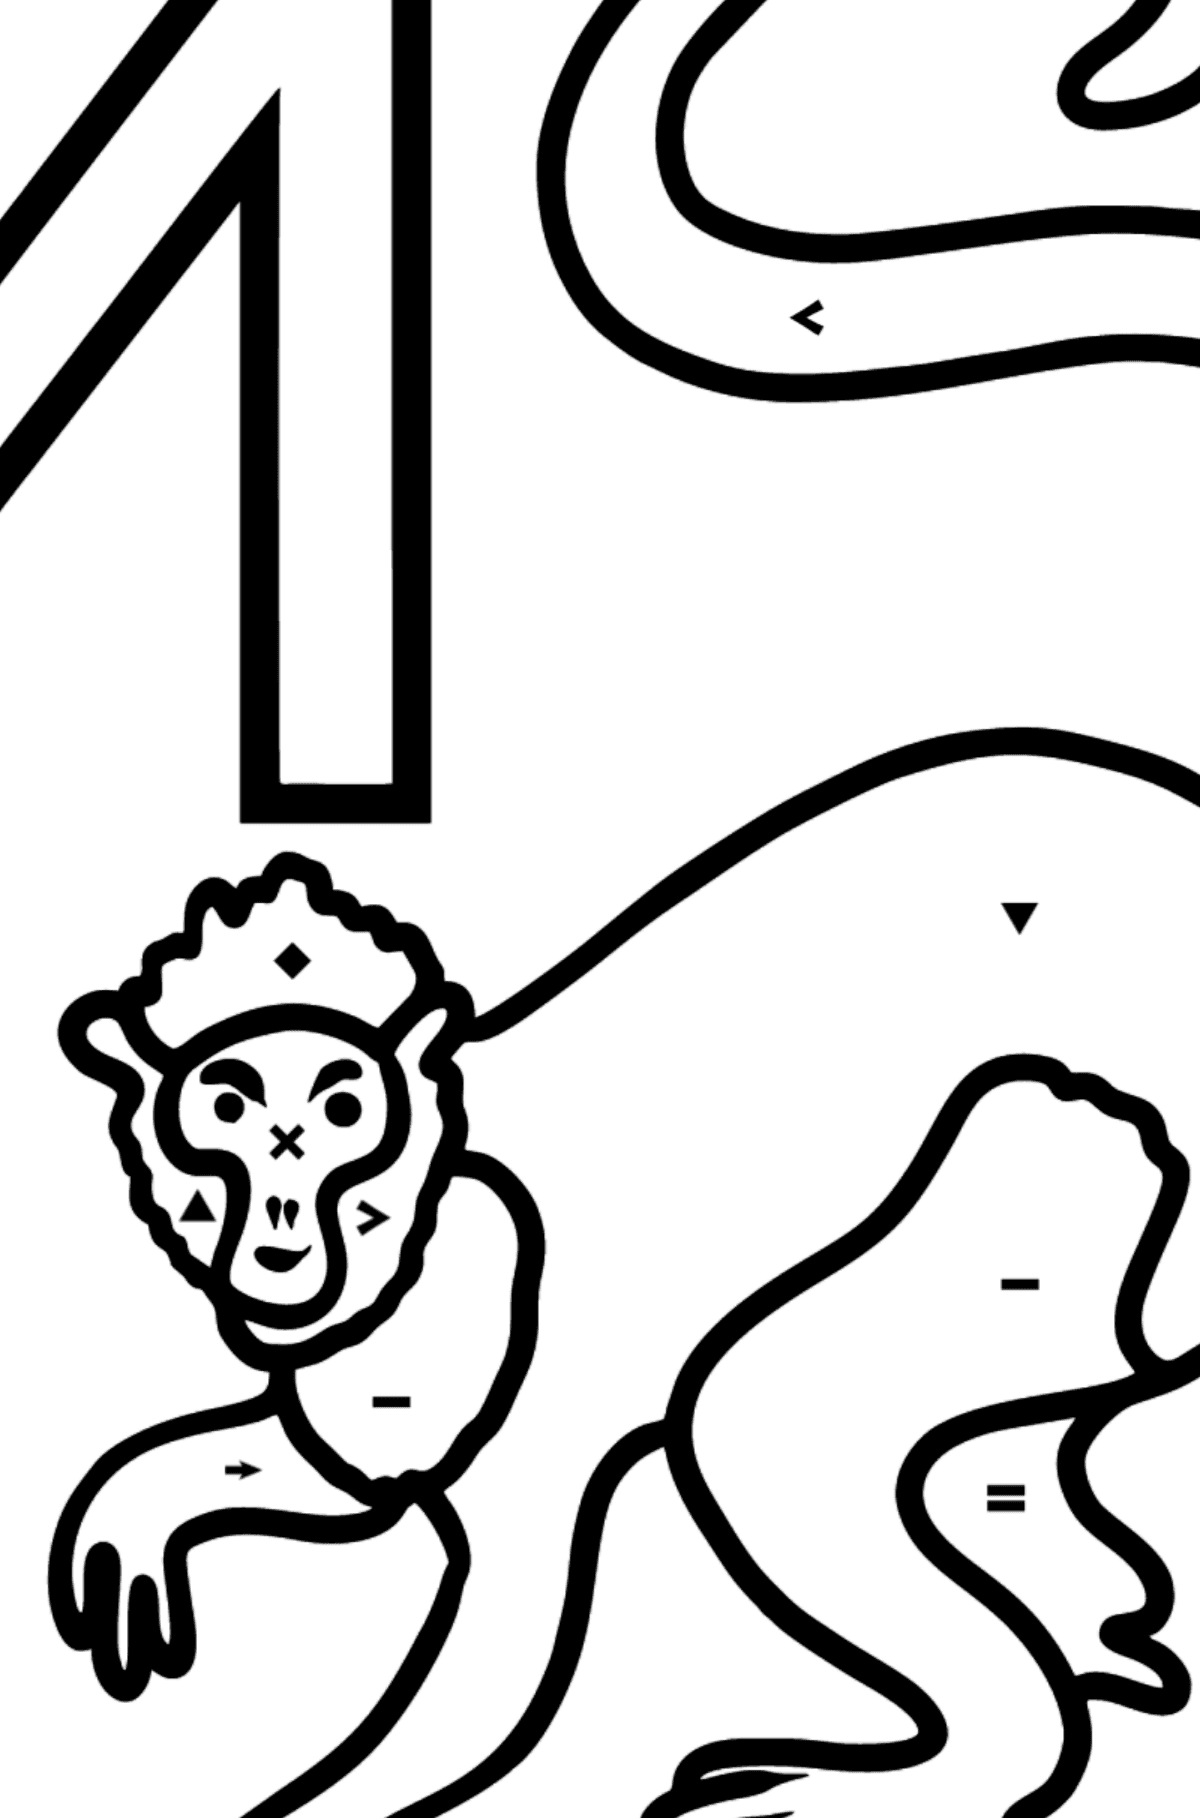 Portuguese Letter M coloring pages - MACACO - Coloring by Symbols for Kids